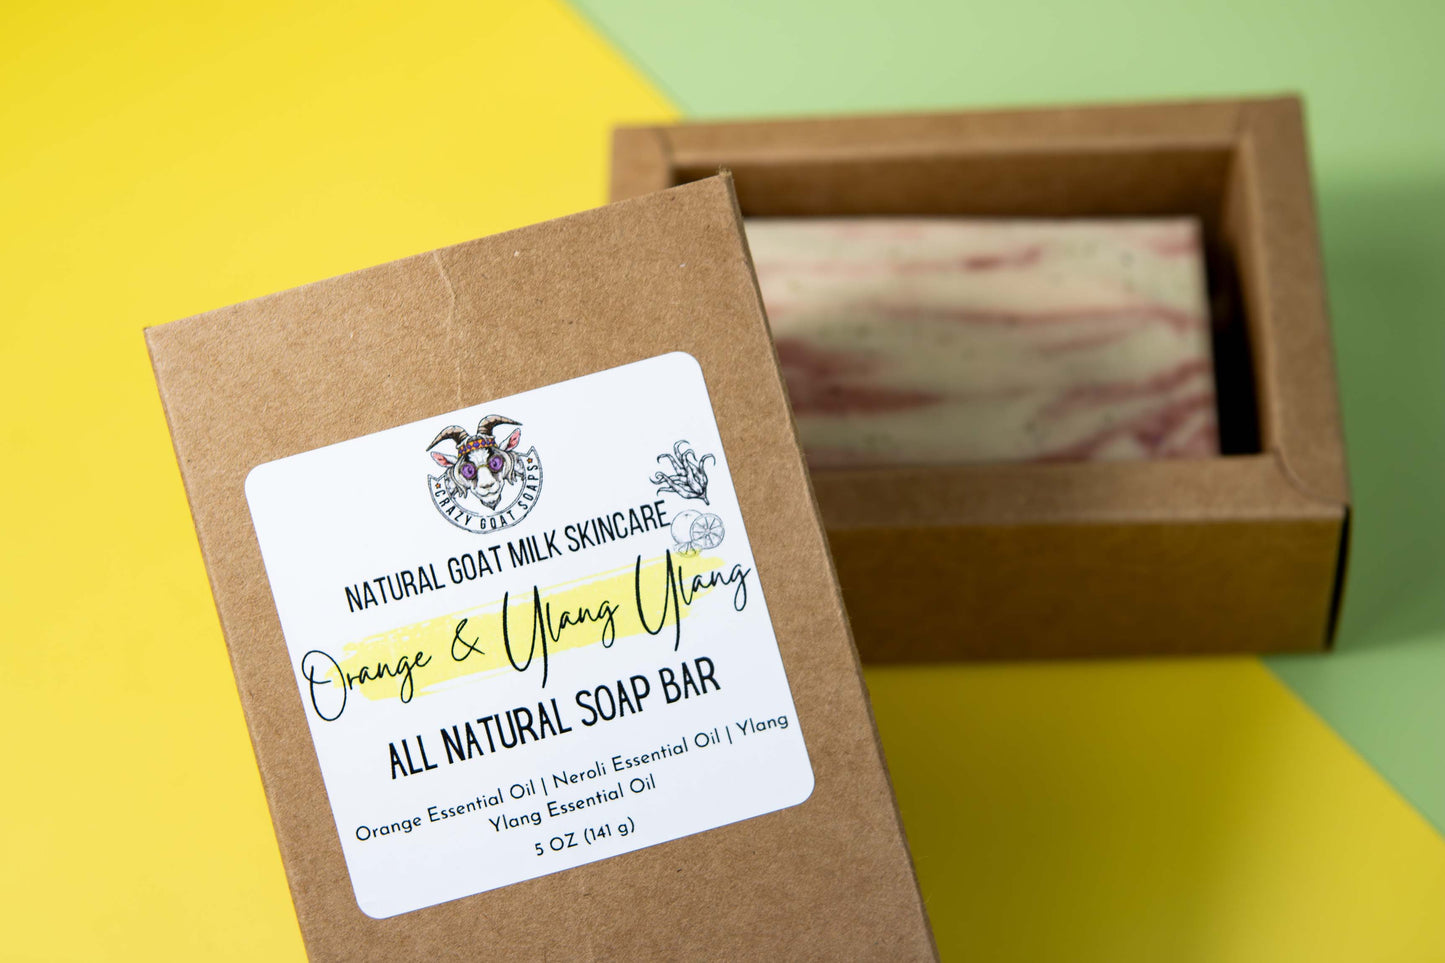 Our Orange and Ylang Ylang Essential Oil Goat Milk Soap Bar comes fully boxed and labeled.